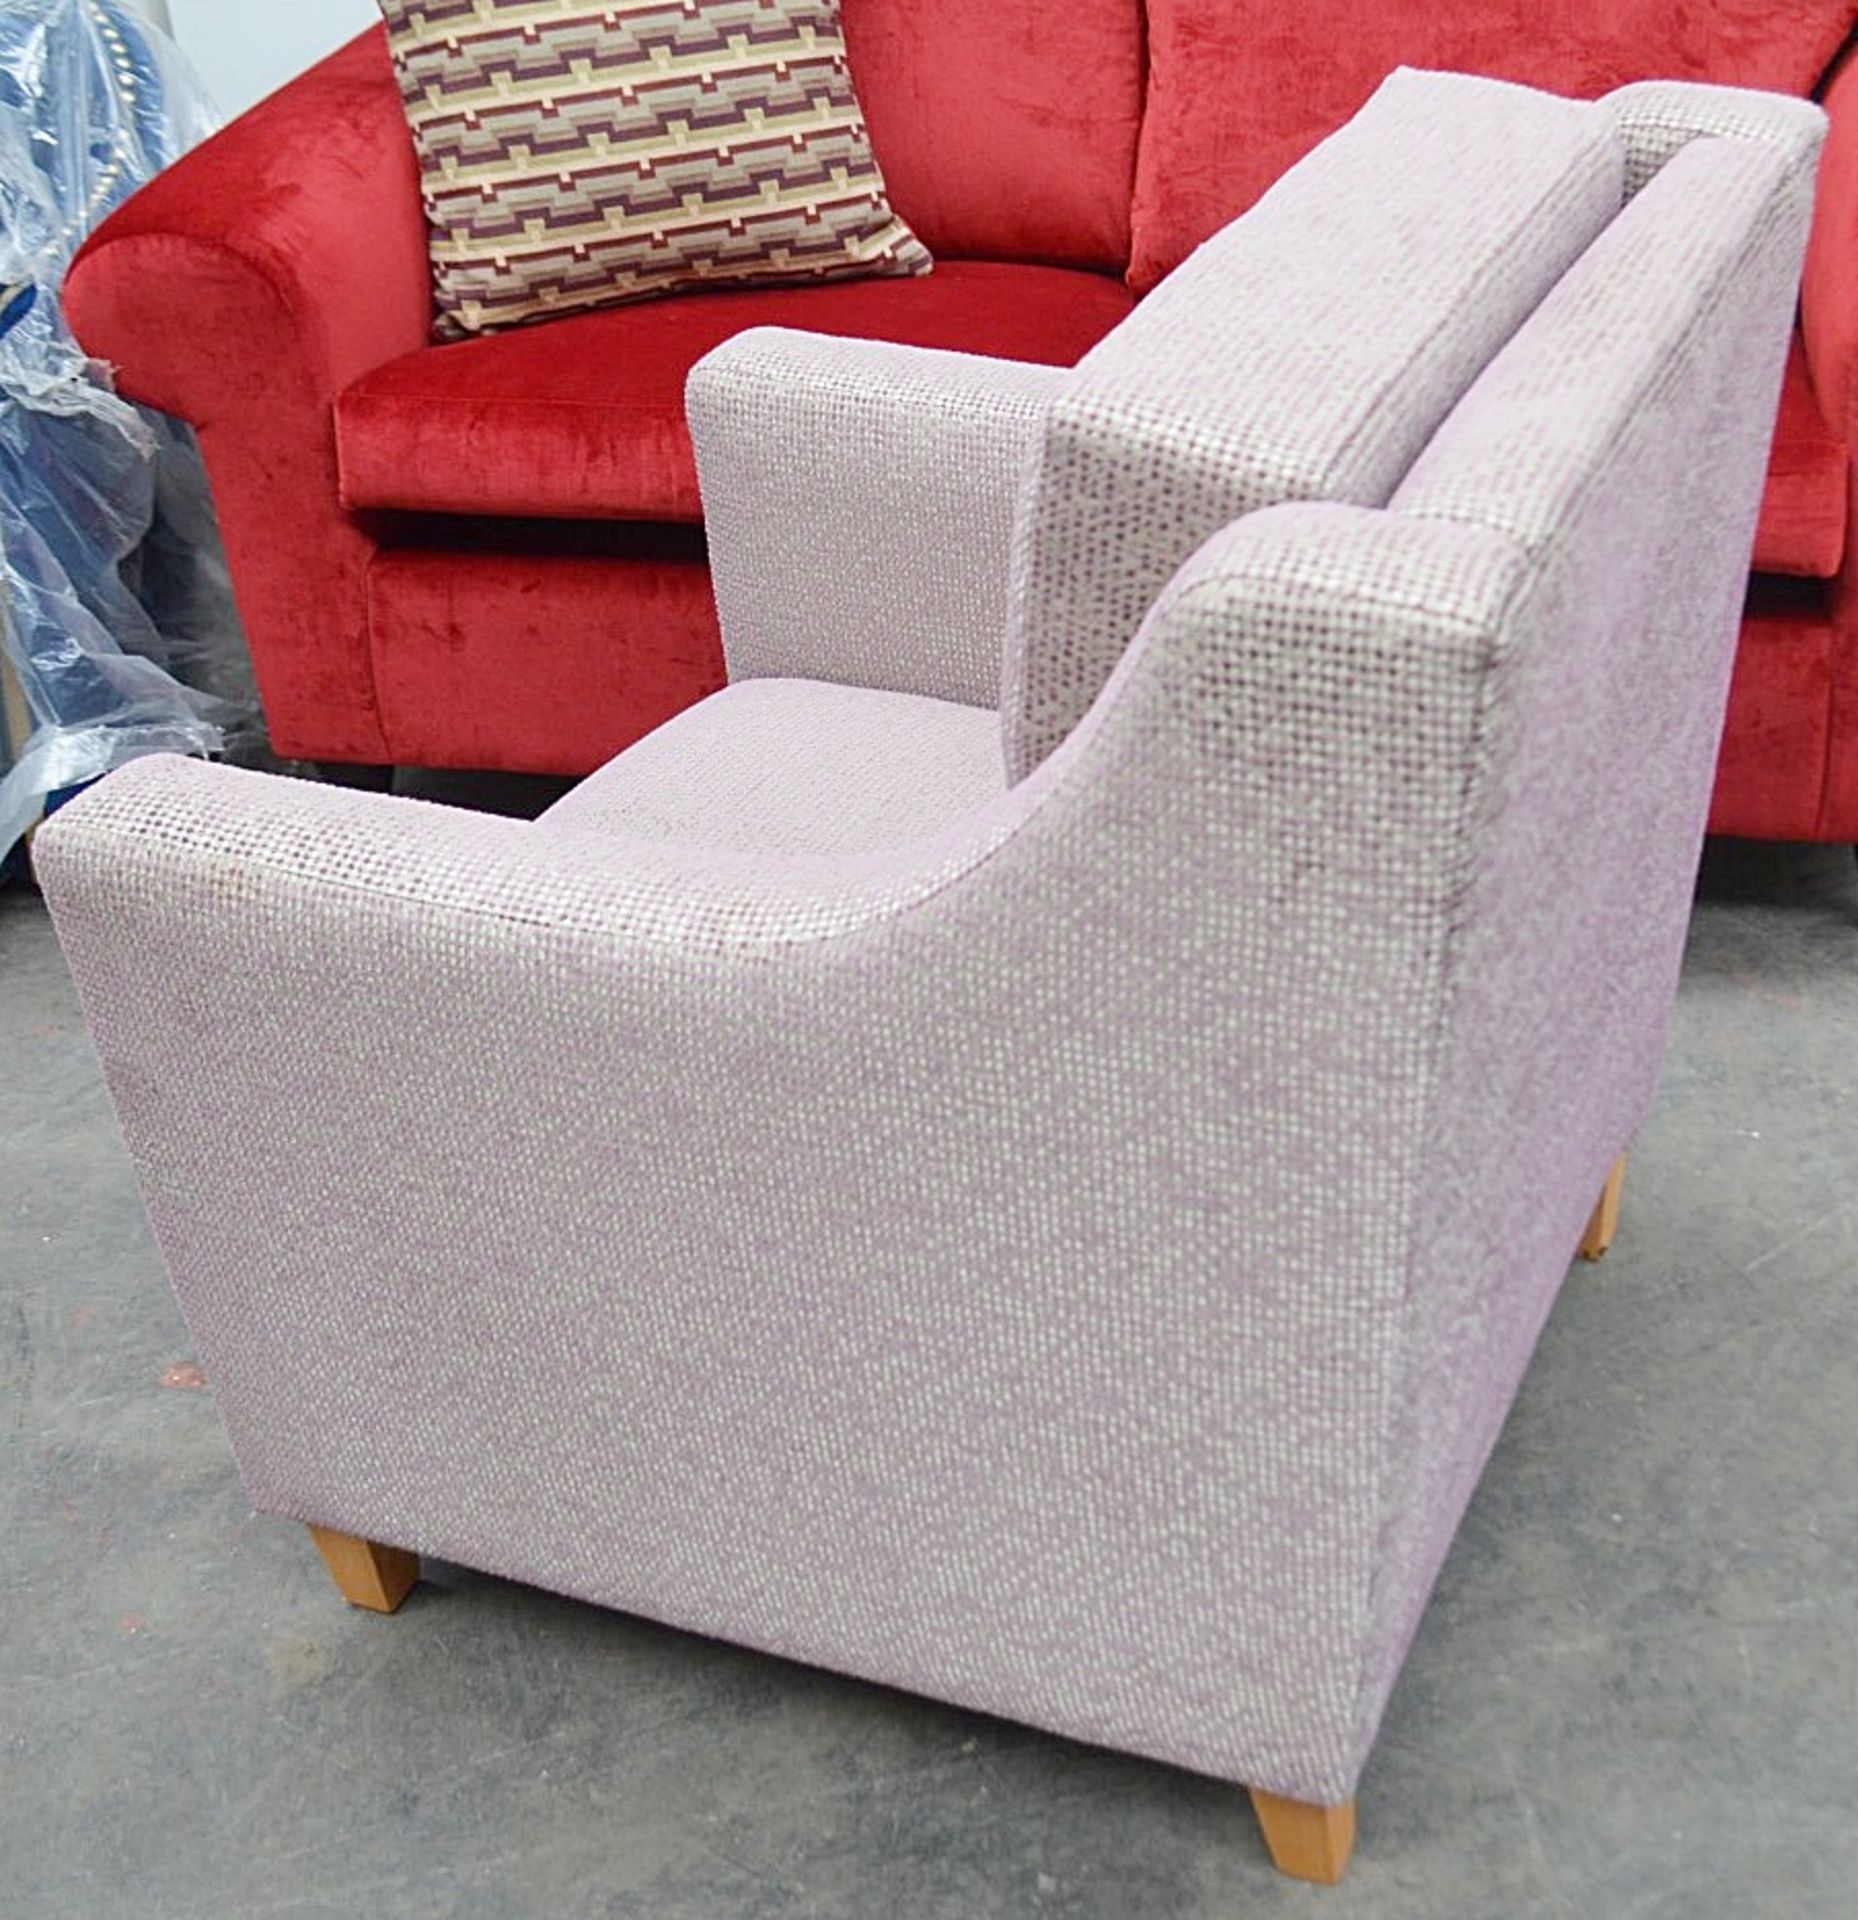 1 x Large Commercial Armchair Upholstered In A Grey & Purple Premium Fabric - Professionally - Image 2 of 7